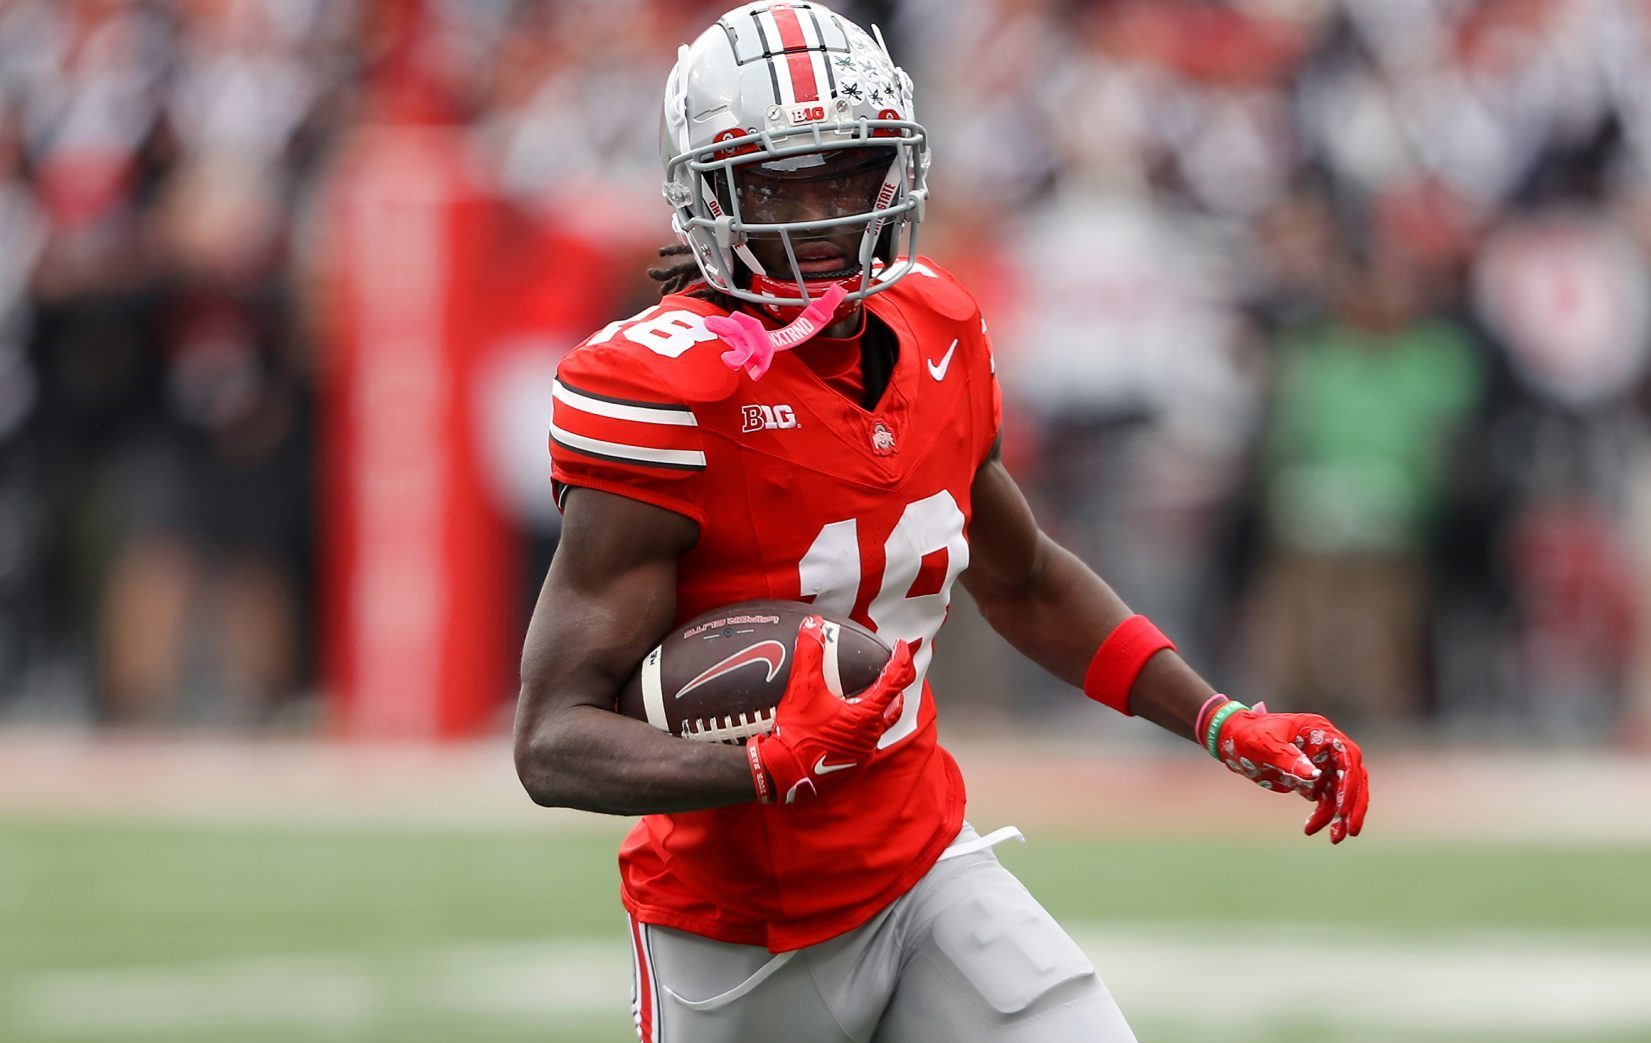 Oct 21, 2023; Columbus, Ohio, USA; Ohio State Buckeyes wide receiver Marvin Harrison Jr. (18) runs after a catch against the Penn State Nittany Lions during the second quarter at Ohio Stadium. Mandatory Credit: Joseph Maiorana-USA TODAY Sports